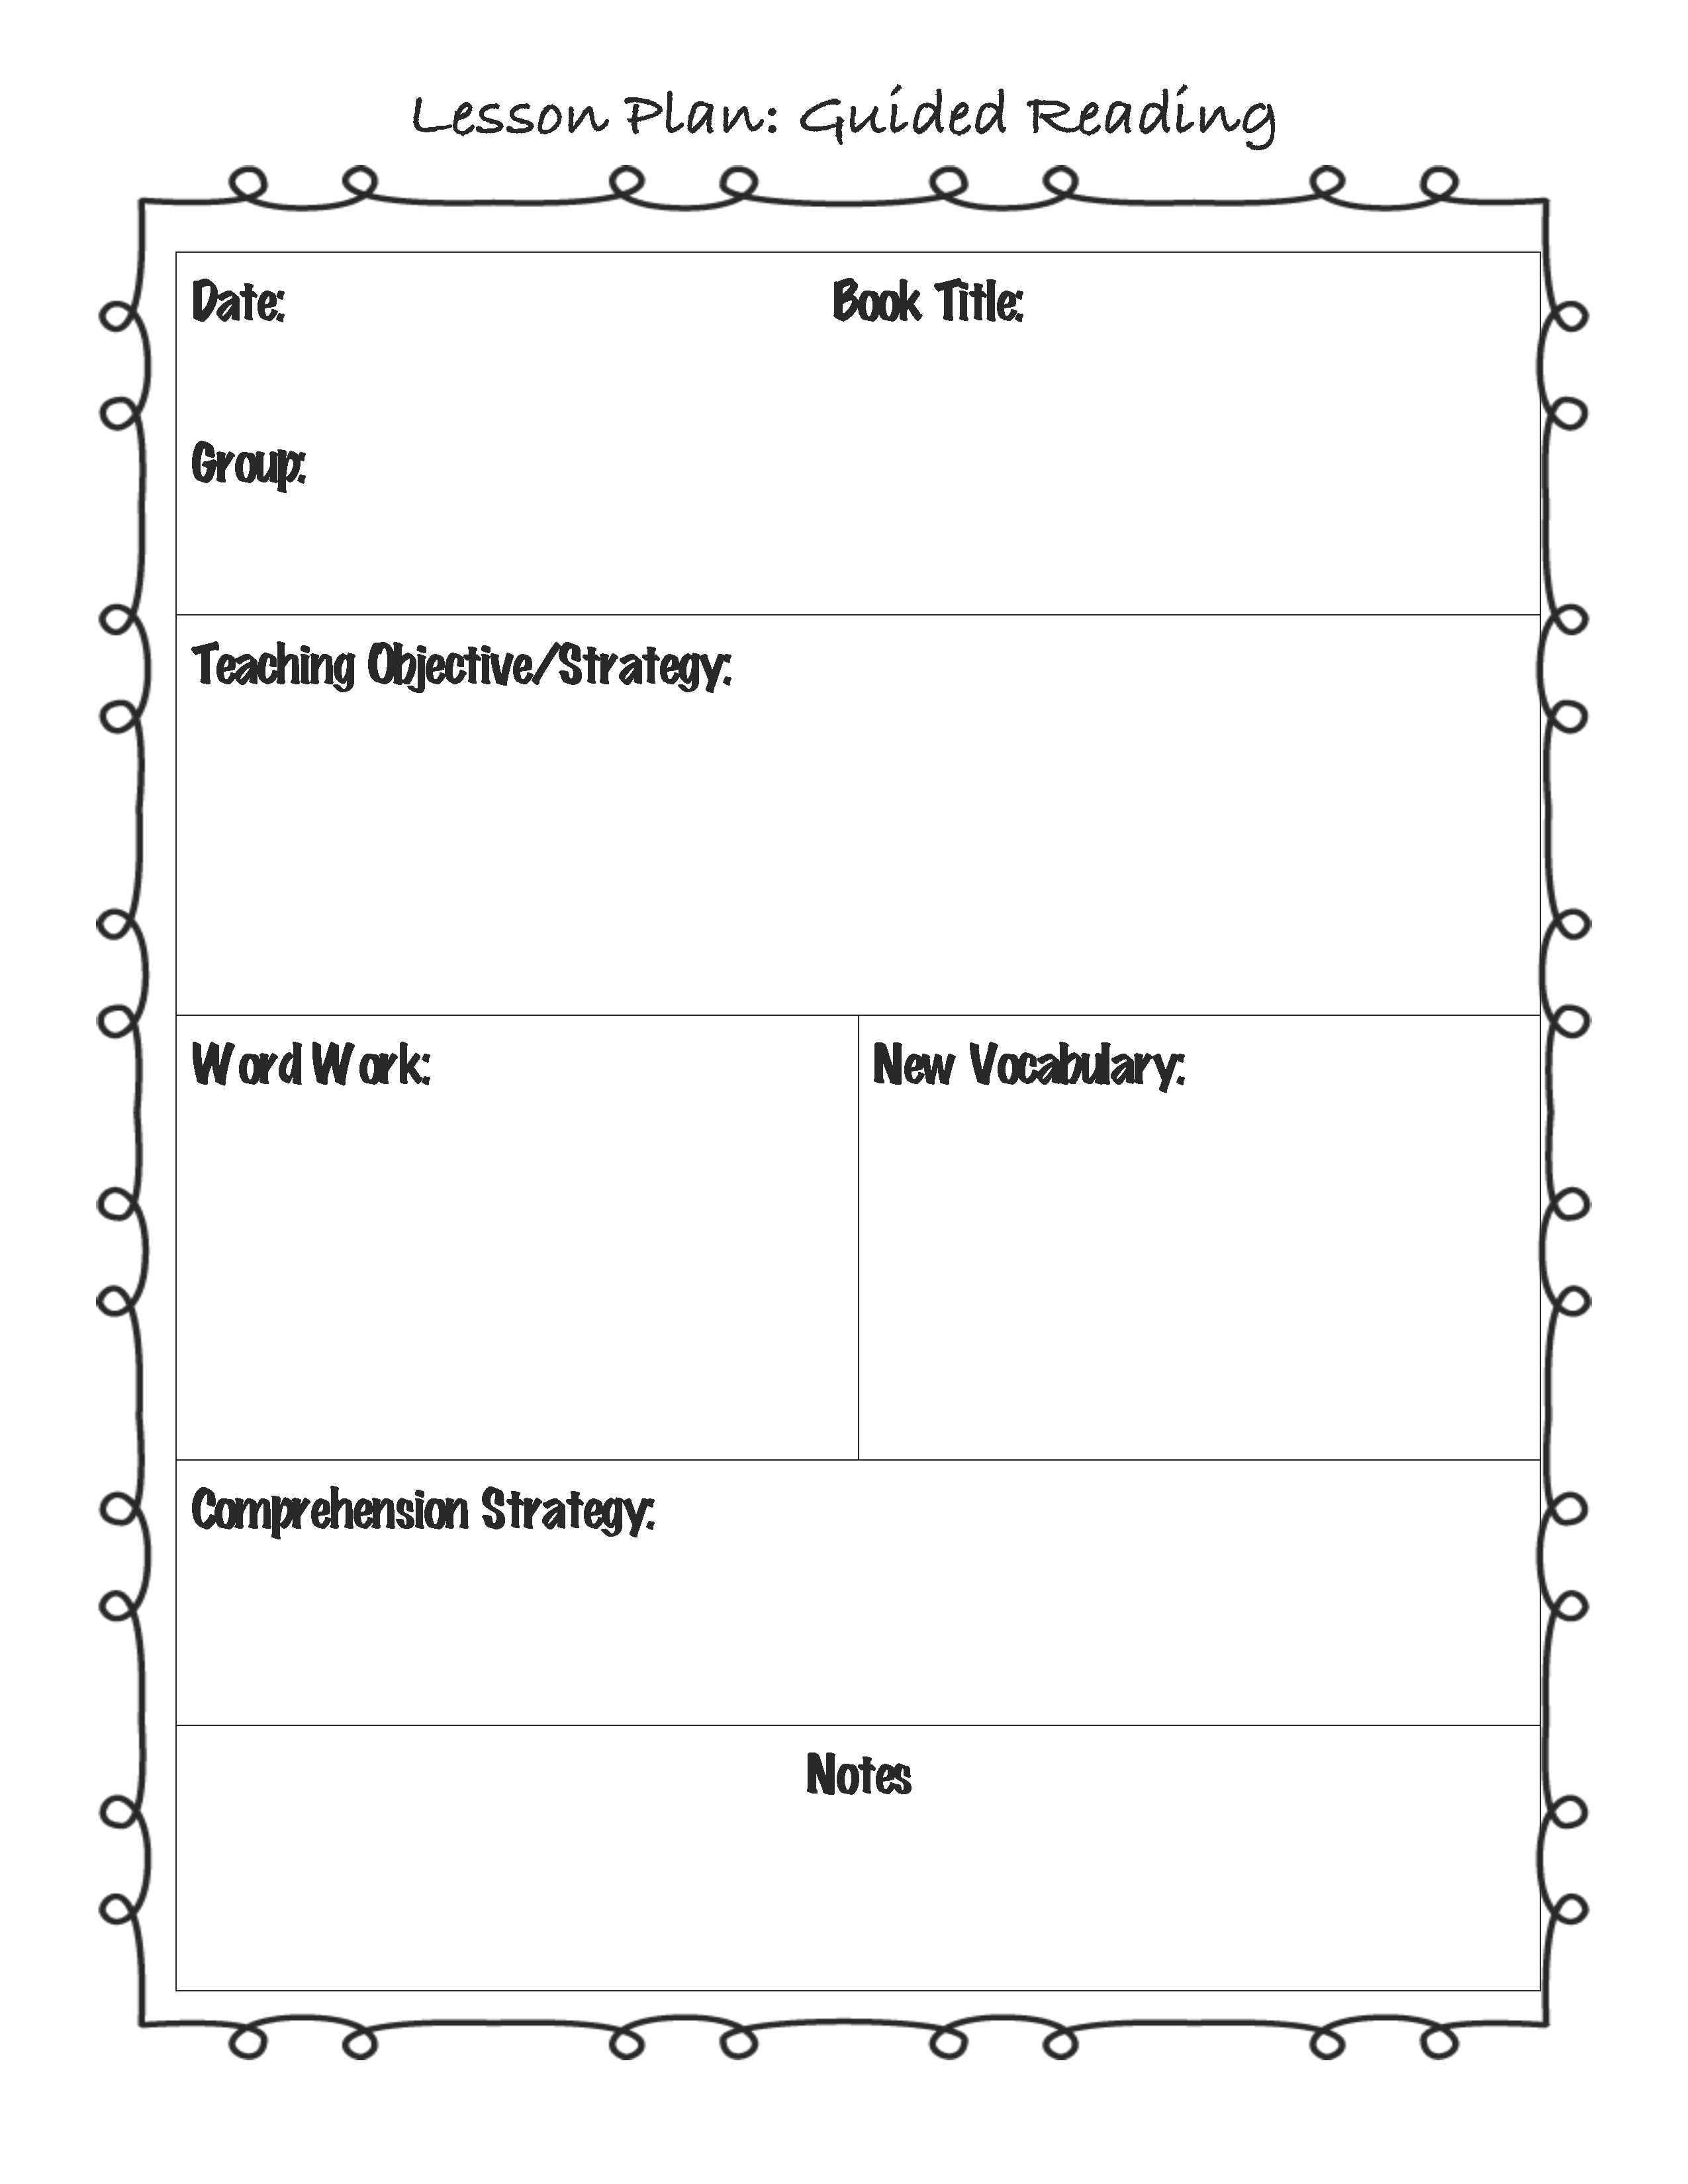 free-printable-guided-reading-lesson-plan-templates-printable-lesson